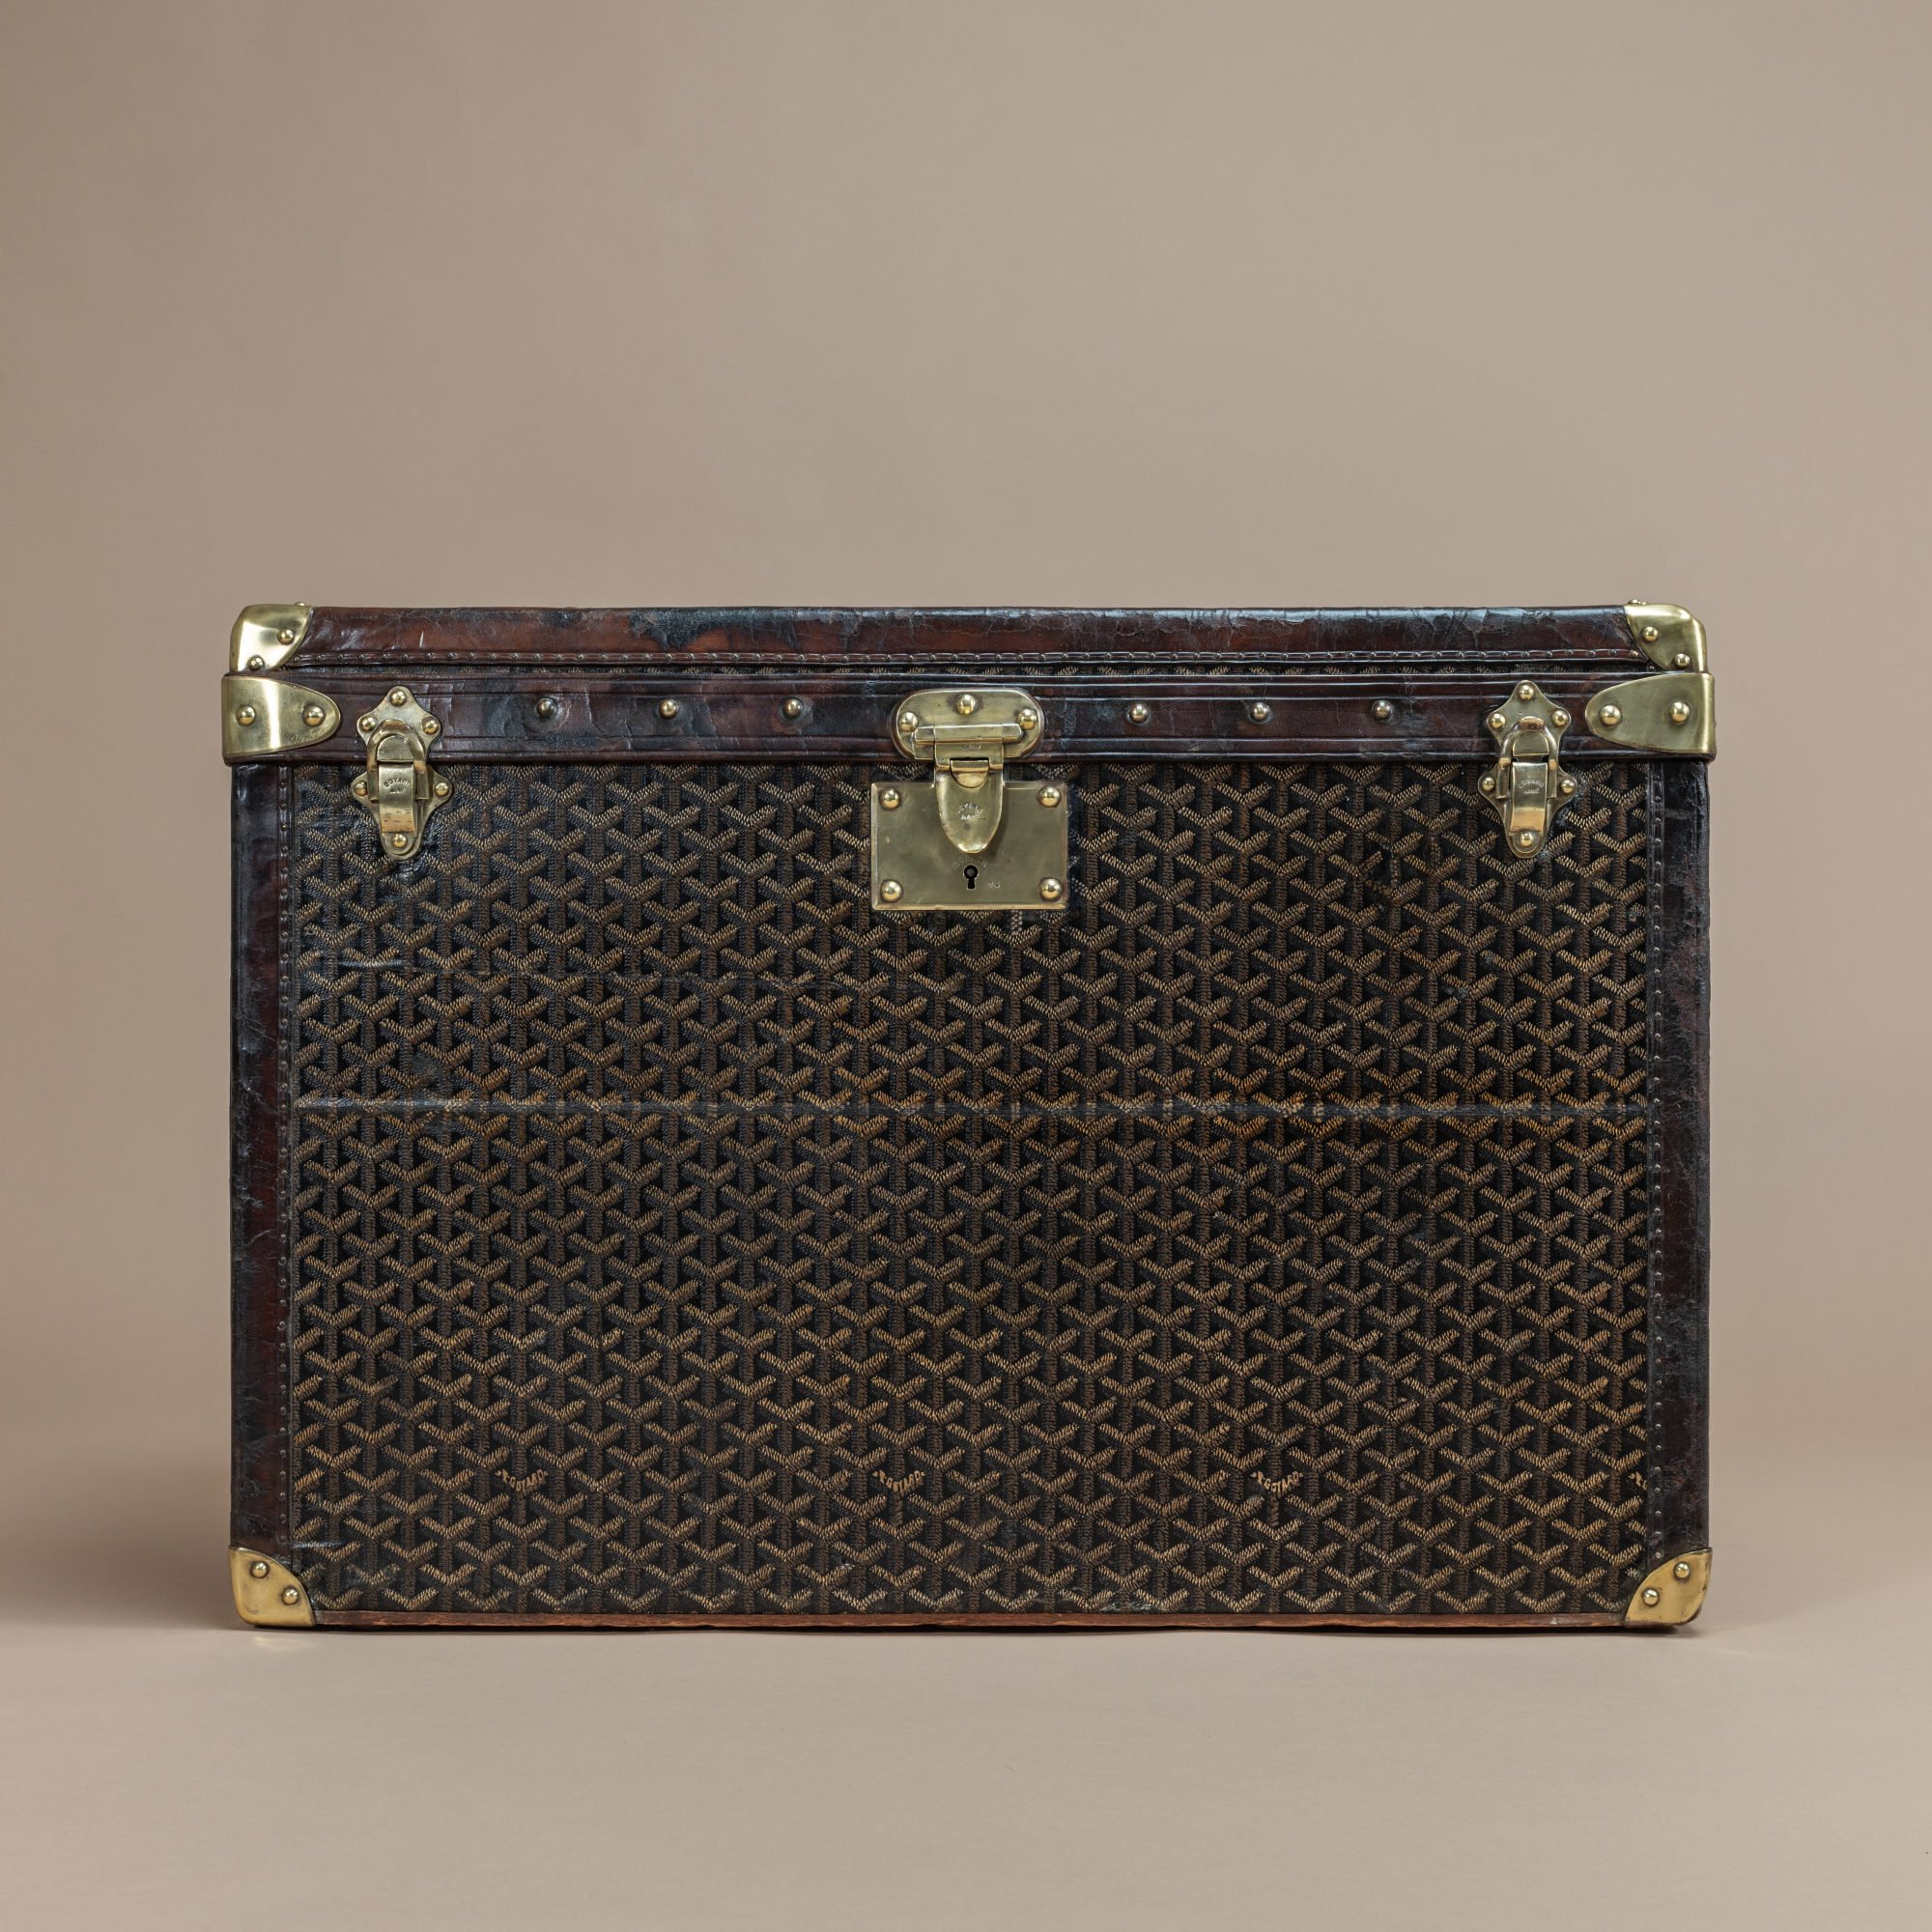 4 OTT trunks to jazz up your home with, from Louis Vuitton's